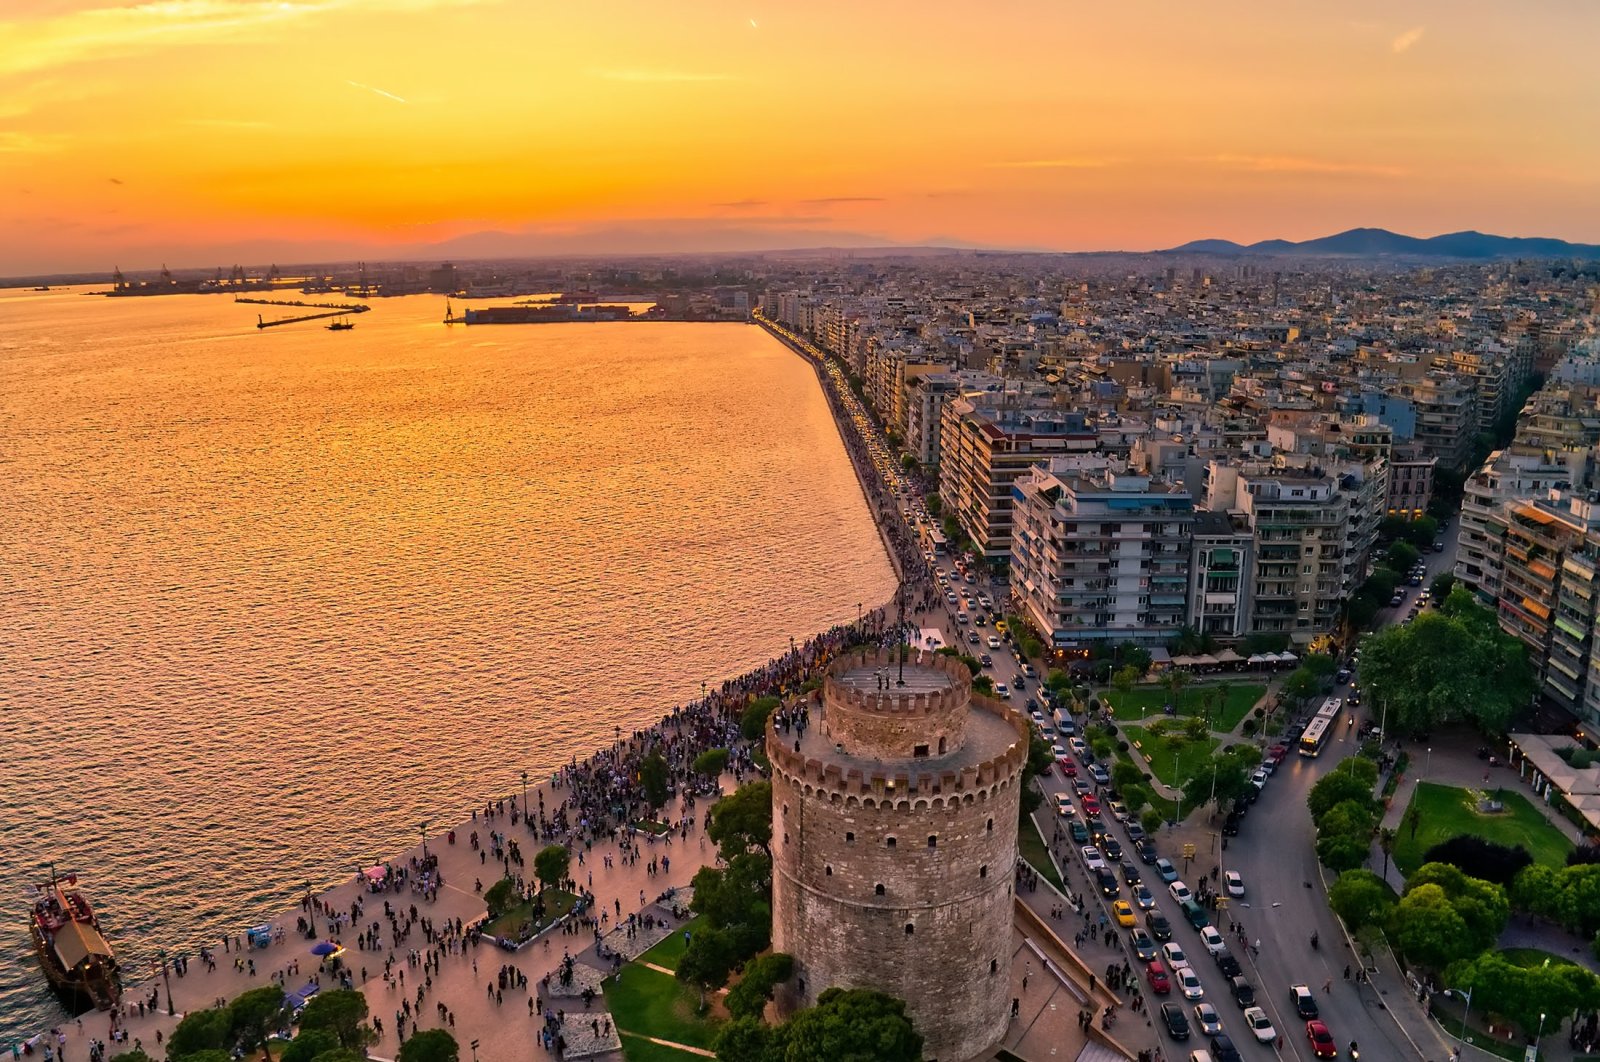 An aerial view shows the iconic White Tower, in Thessaloniki, Greece. (Shutterstock Photo)